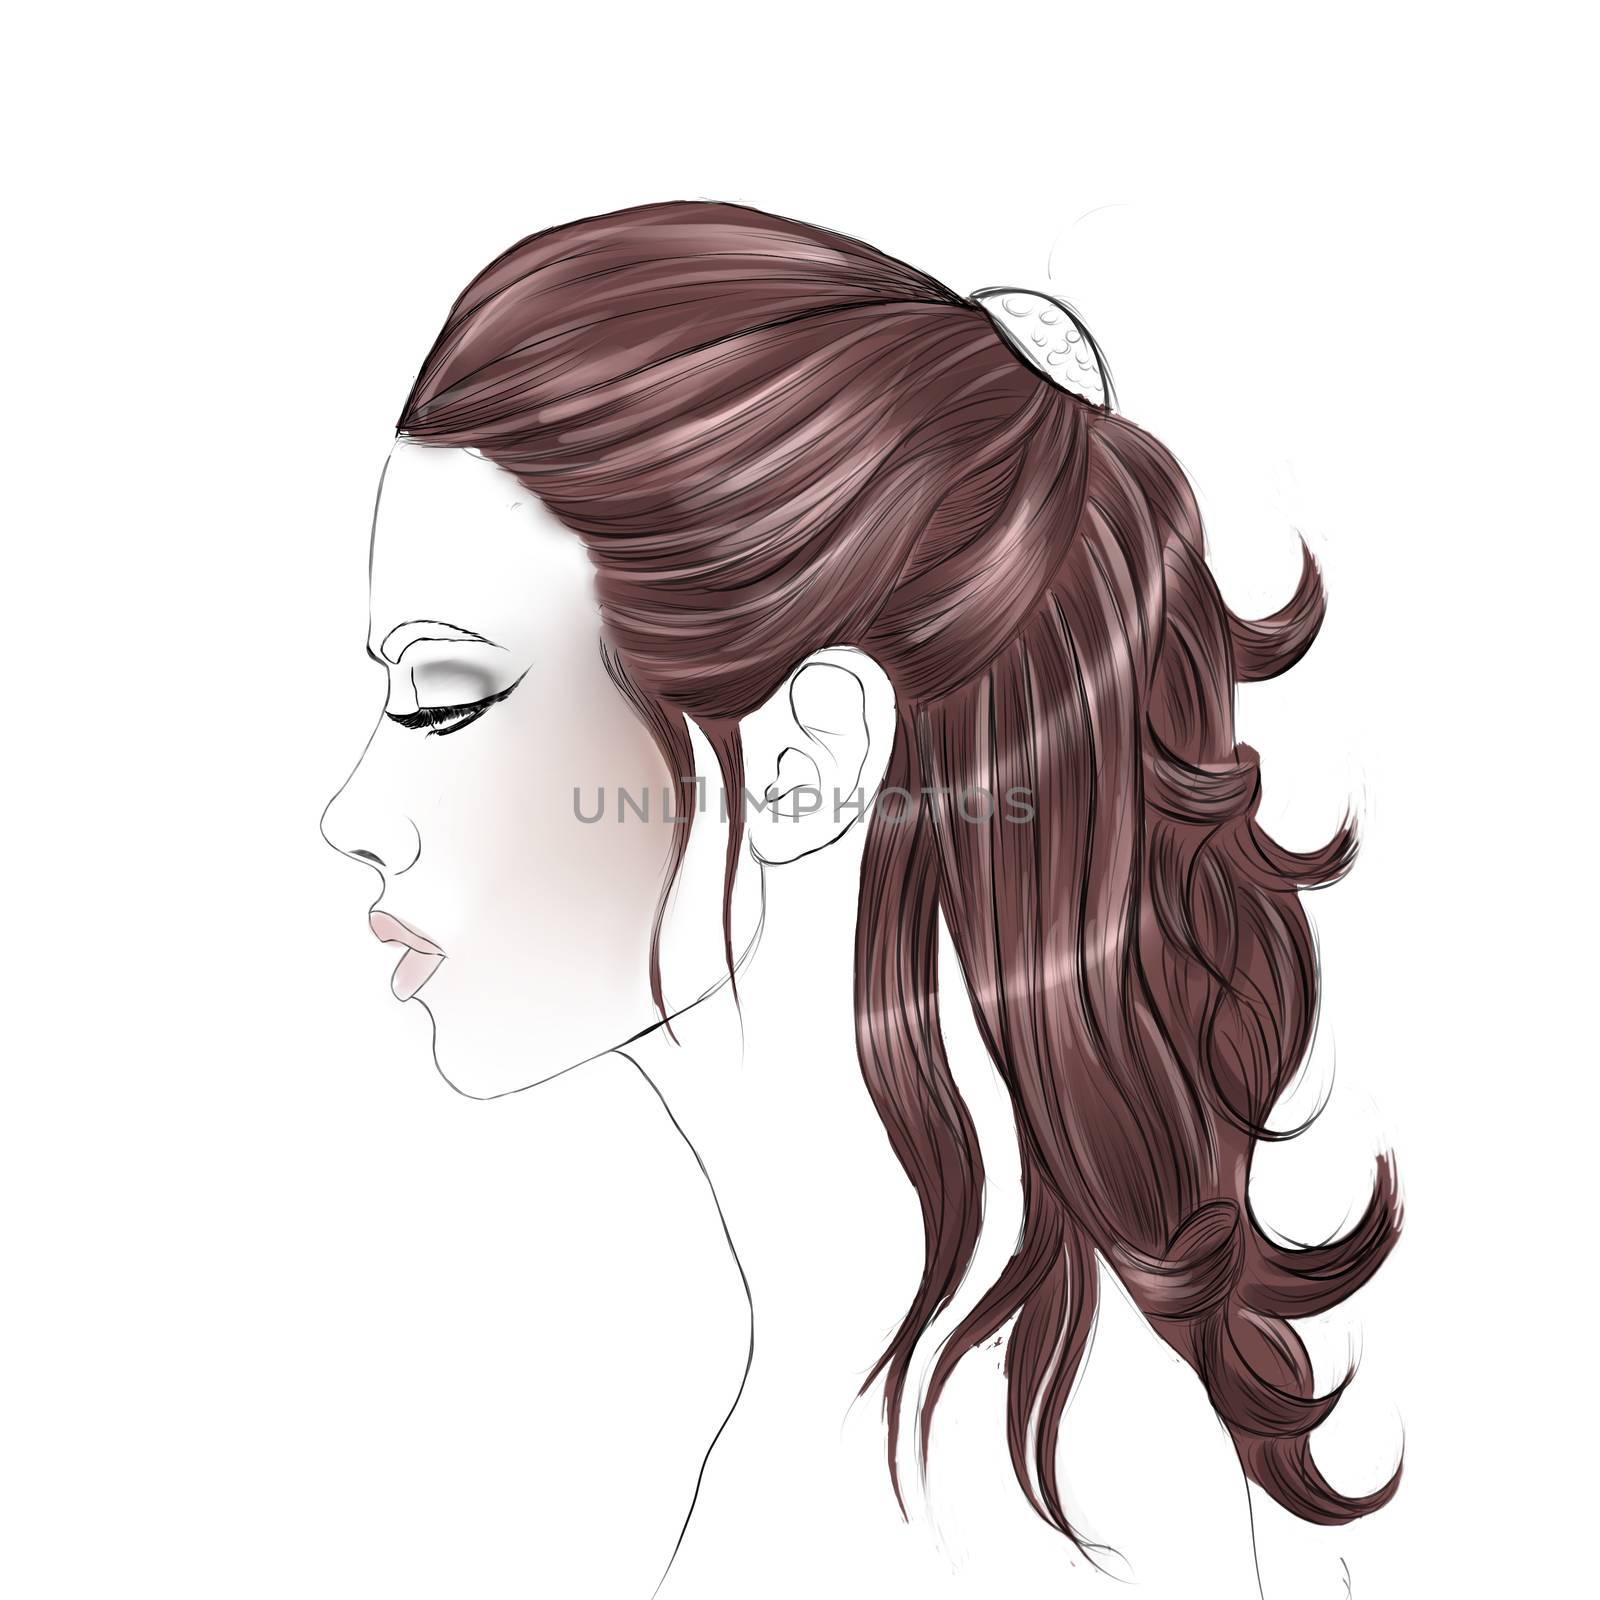 hand drawn raster illustration - profile girl with long wavy brown hair, by GGillustrations